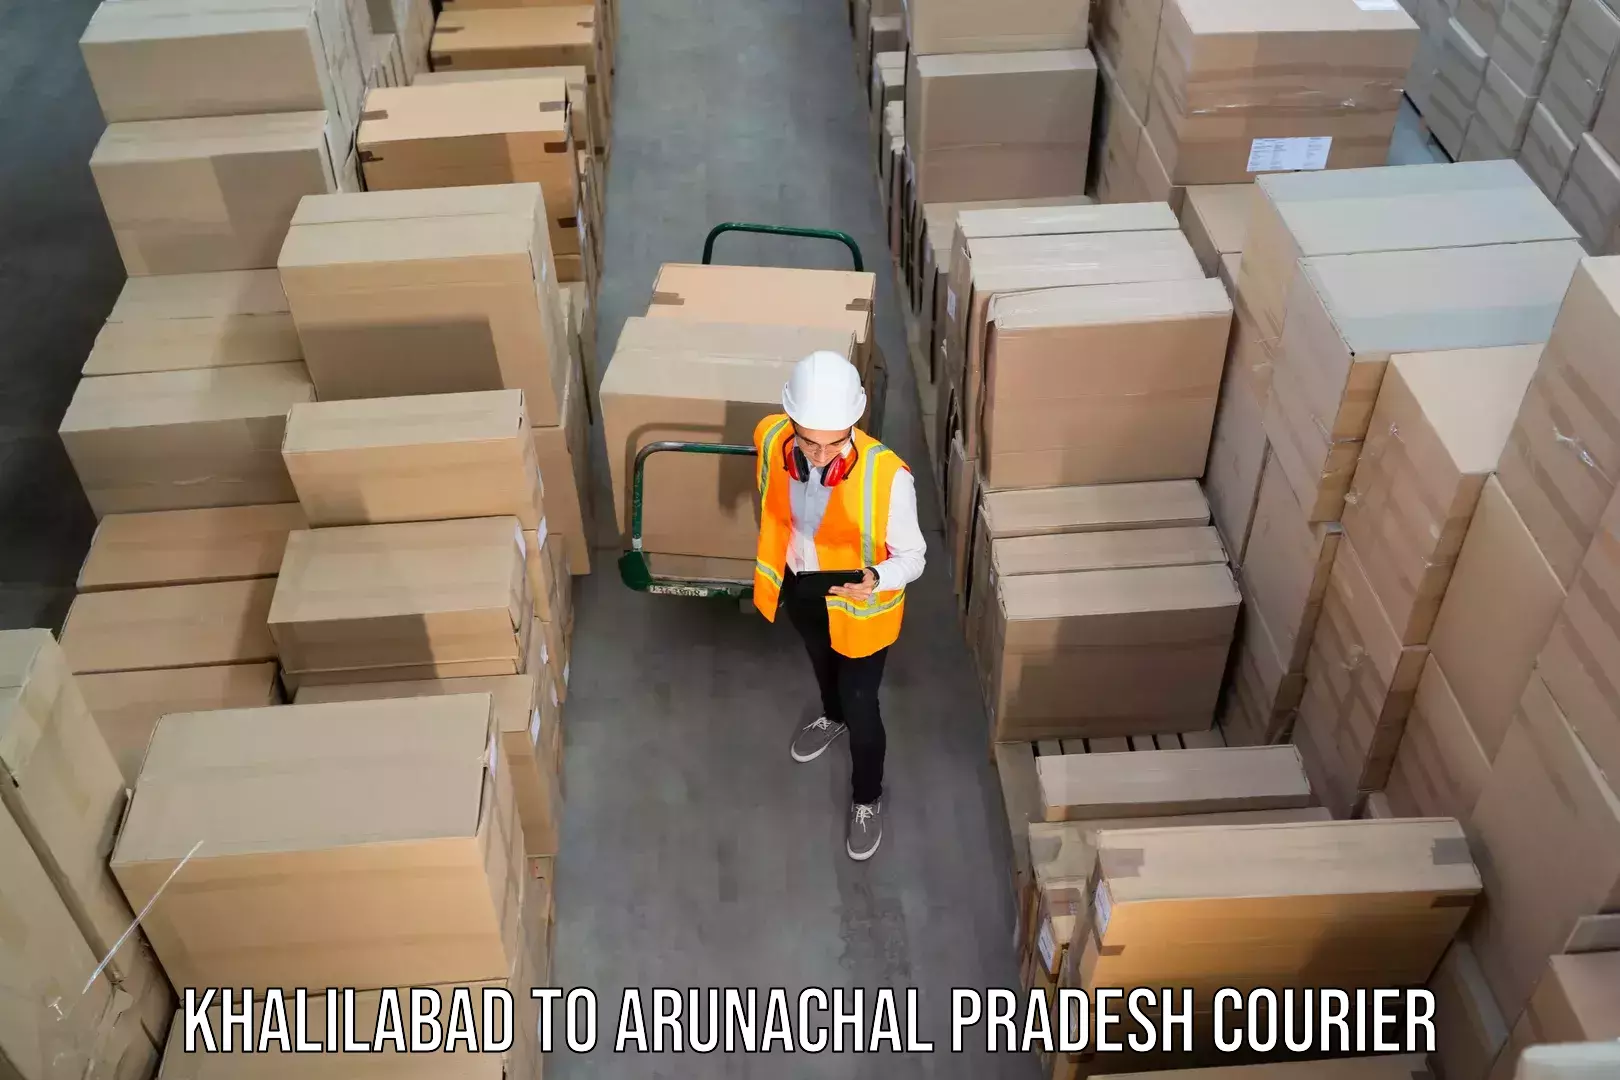 Flexible delivery scheduling Khalilabad to Aalo